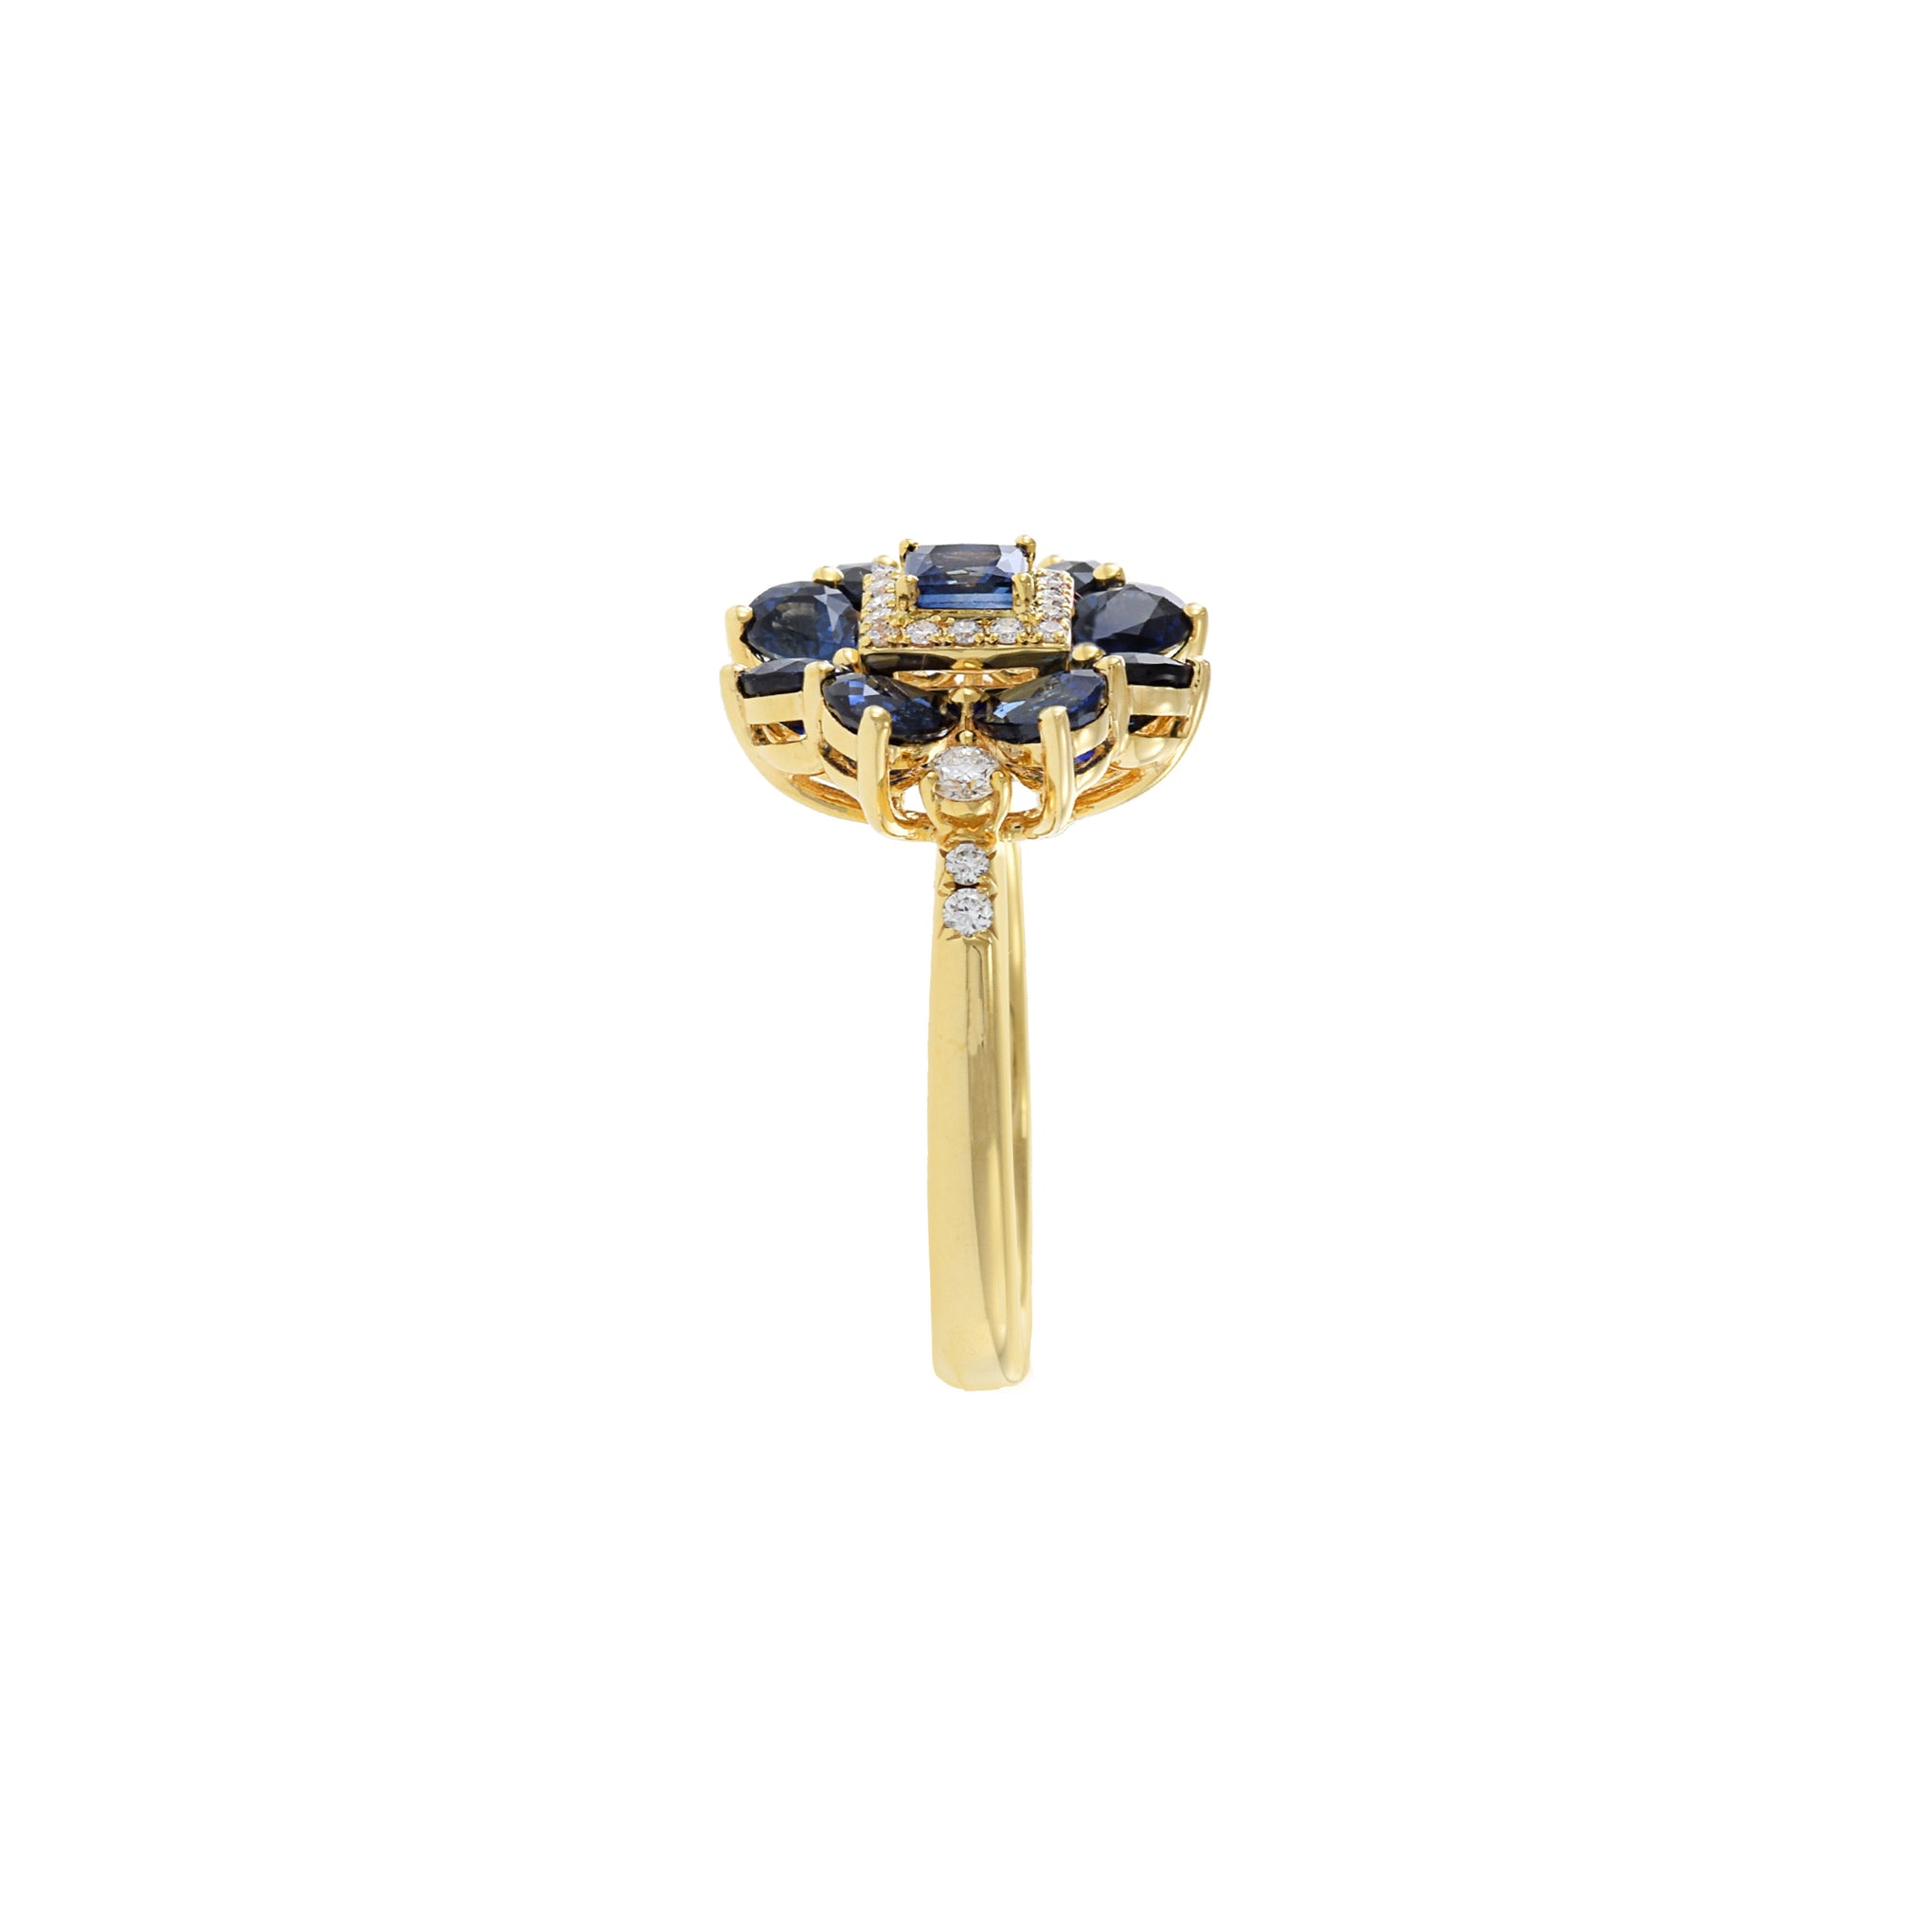 14KT Yellow Gold Blue Sapphire And Diamond Flower Ring